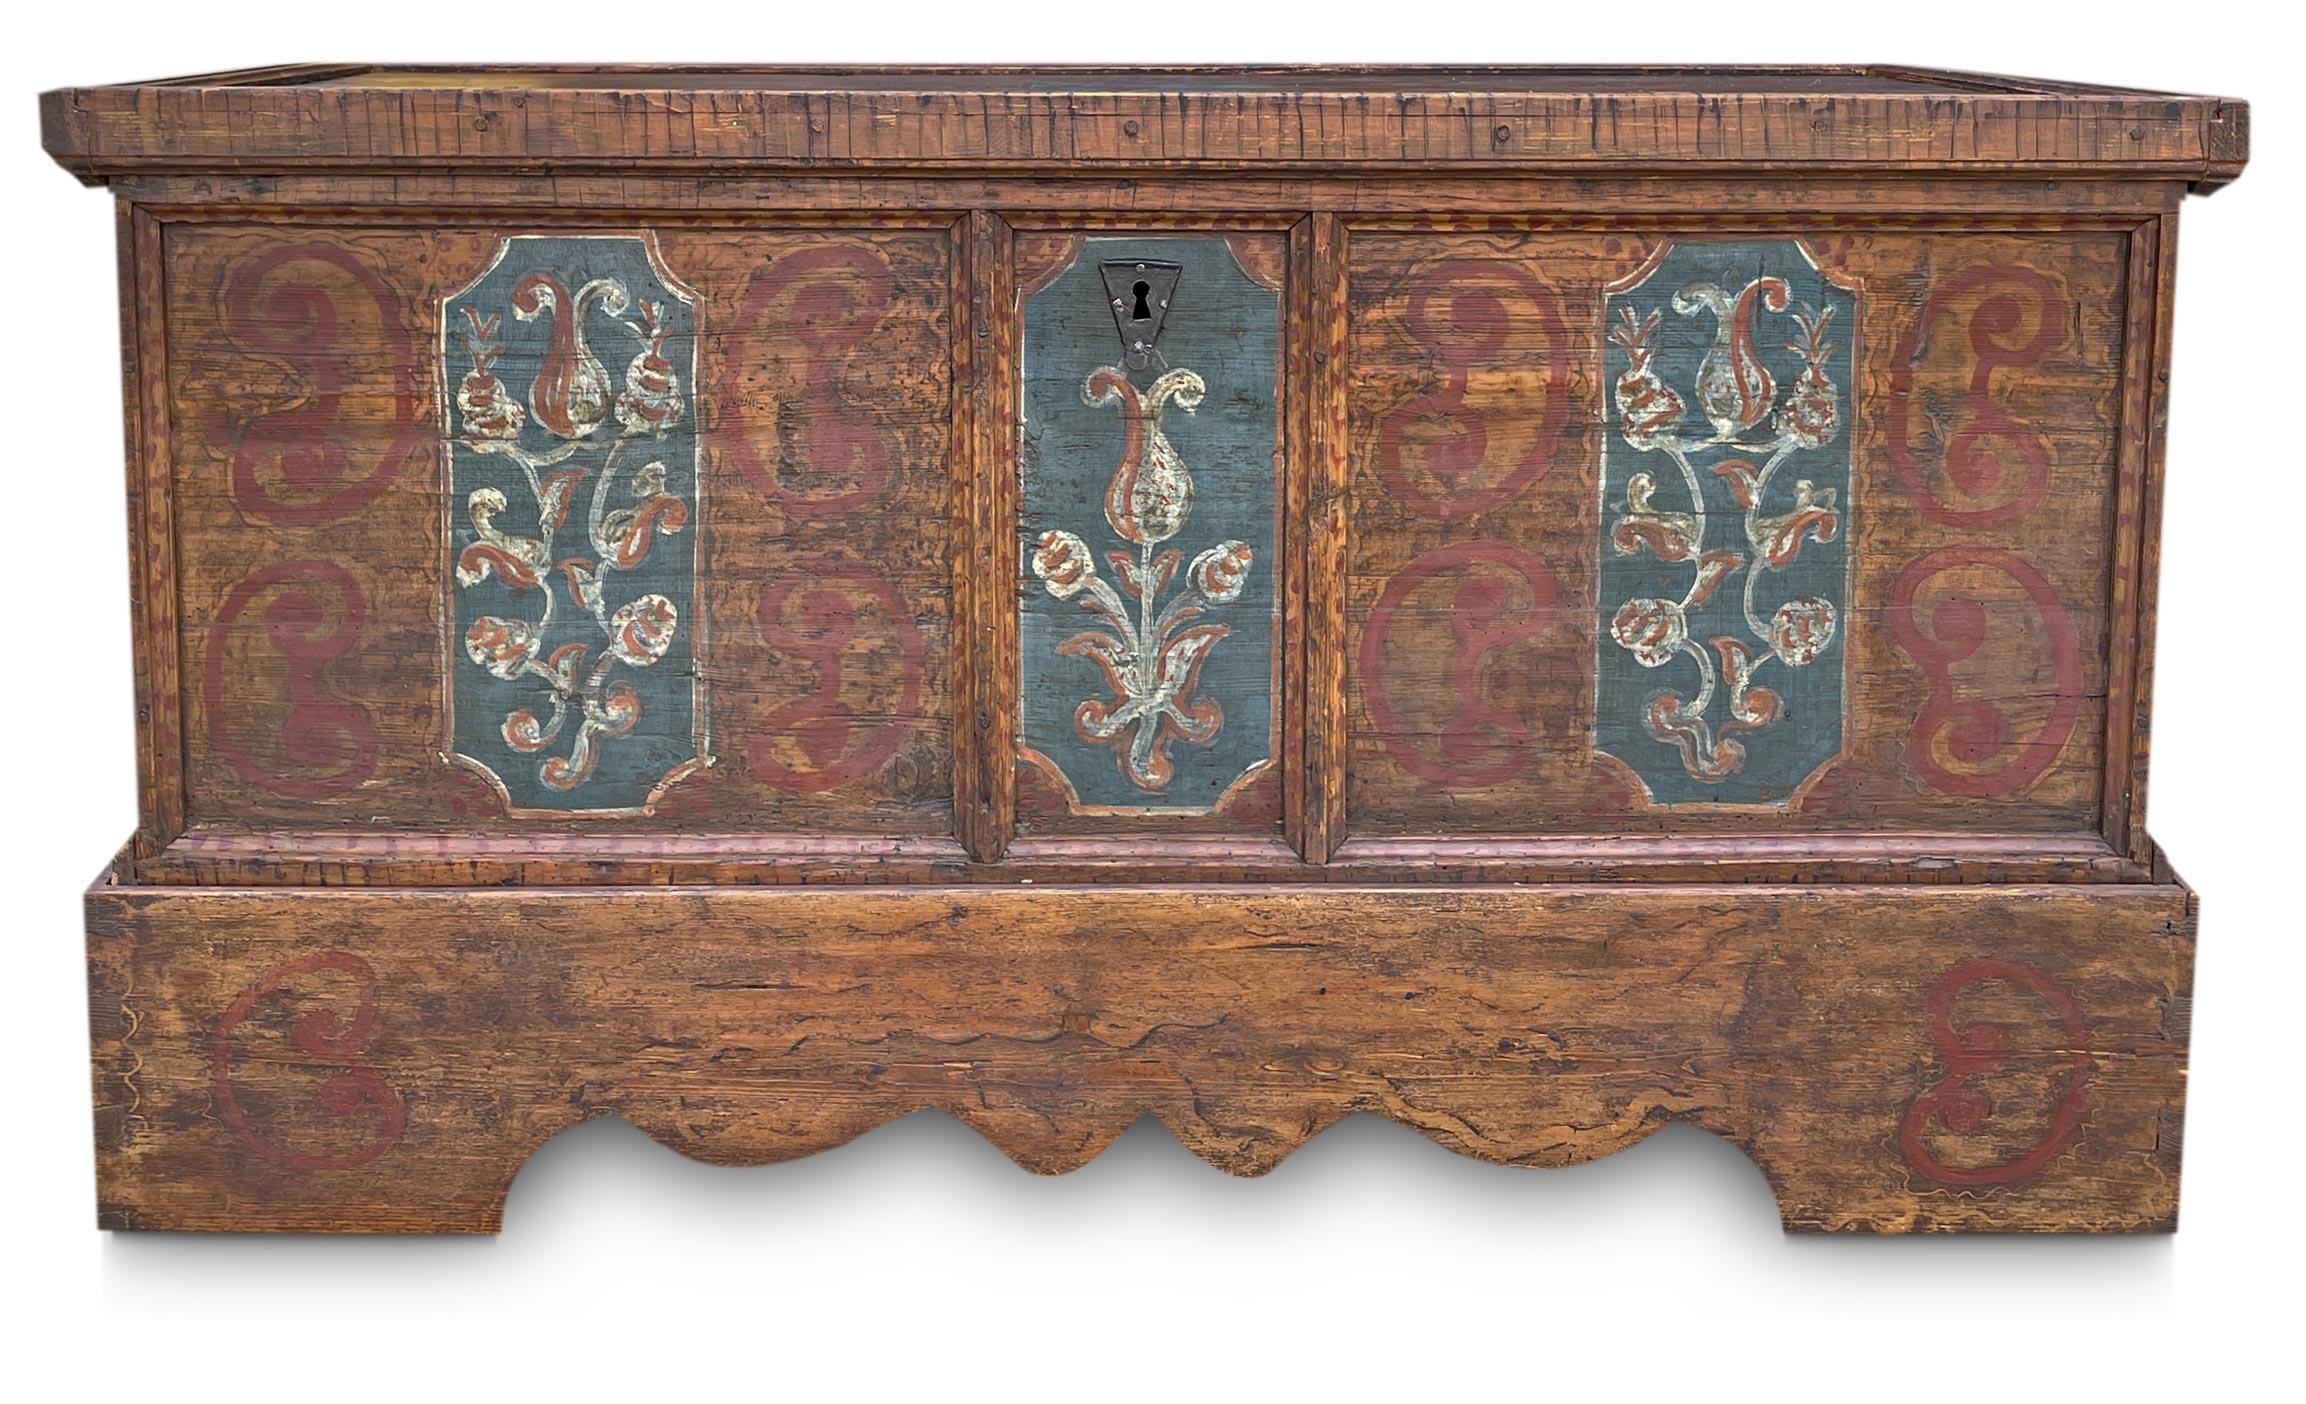 Austrian Mid 18th Century Floral Painted Blanket Chest For Sale